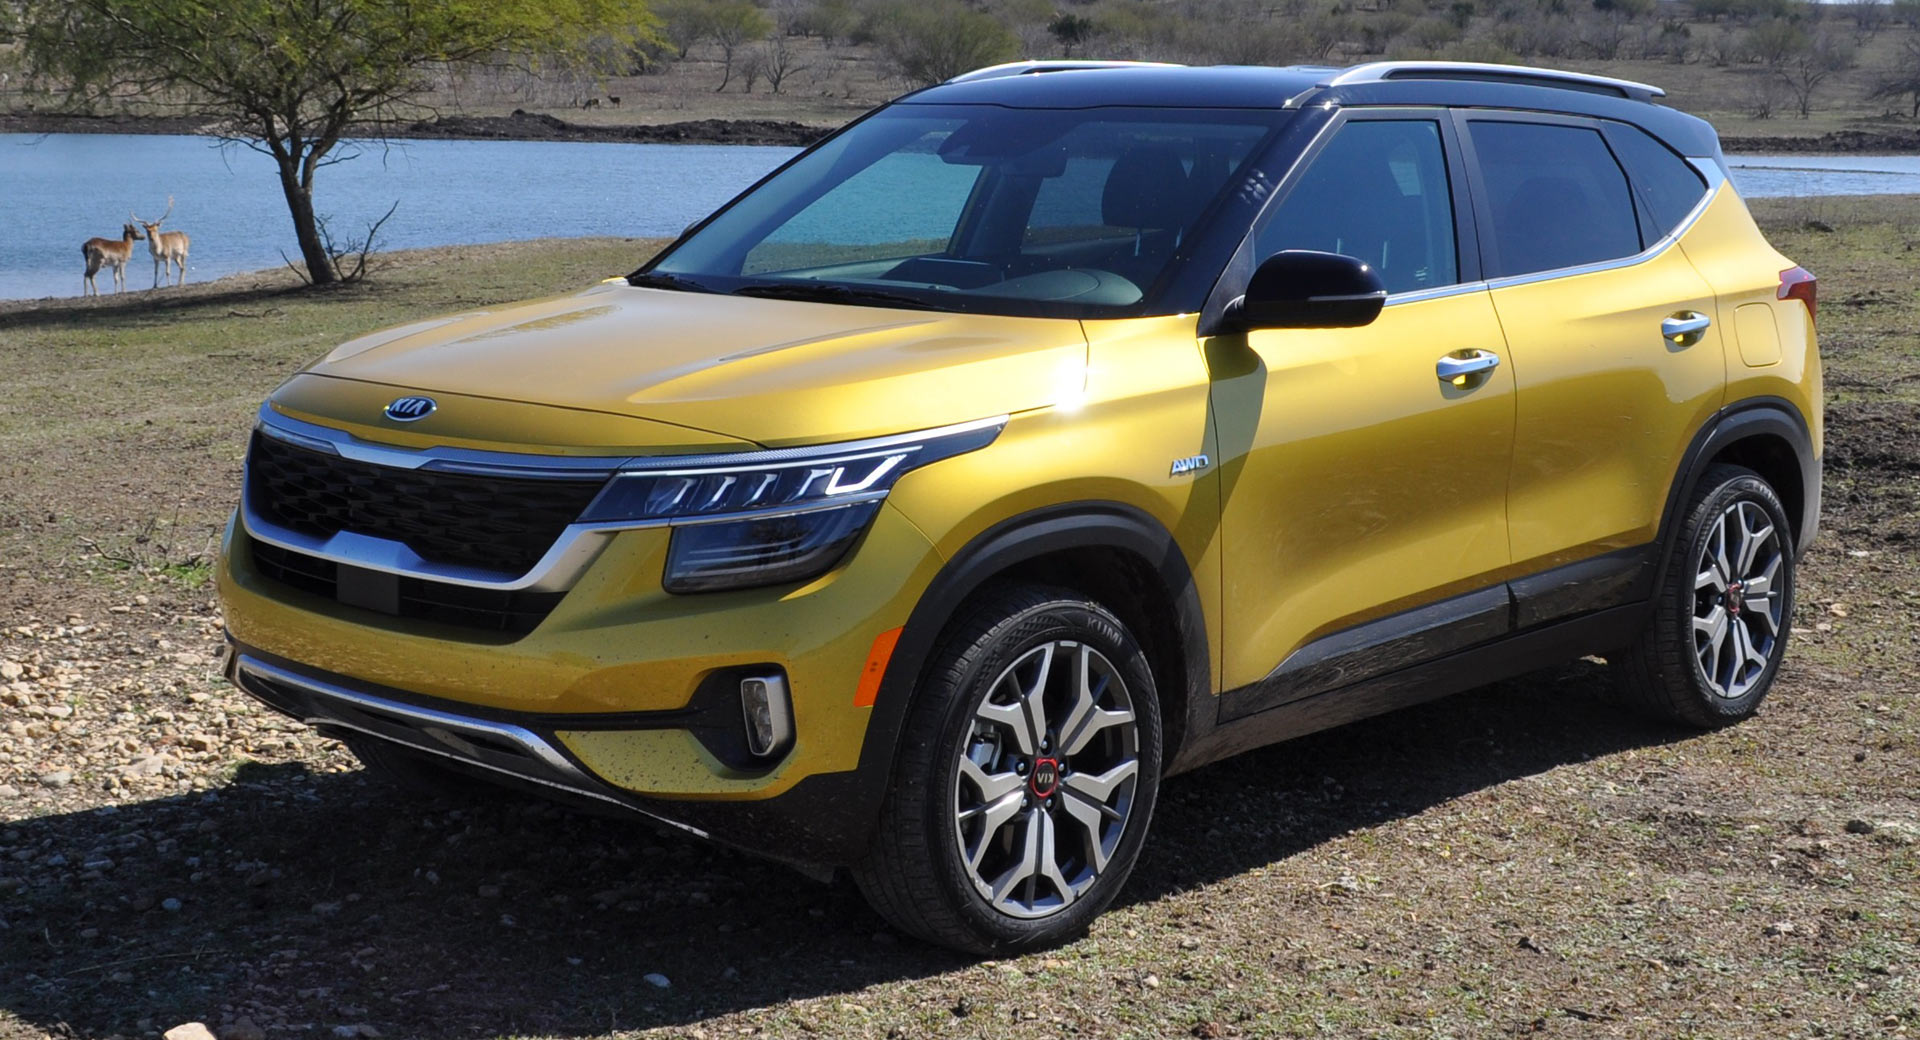 Driven: 2021 Kia Seltos Proves Entry-Level Crossovers Don't Have Be ...